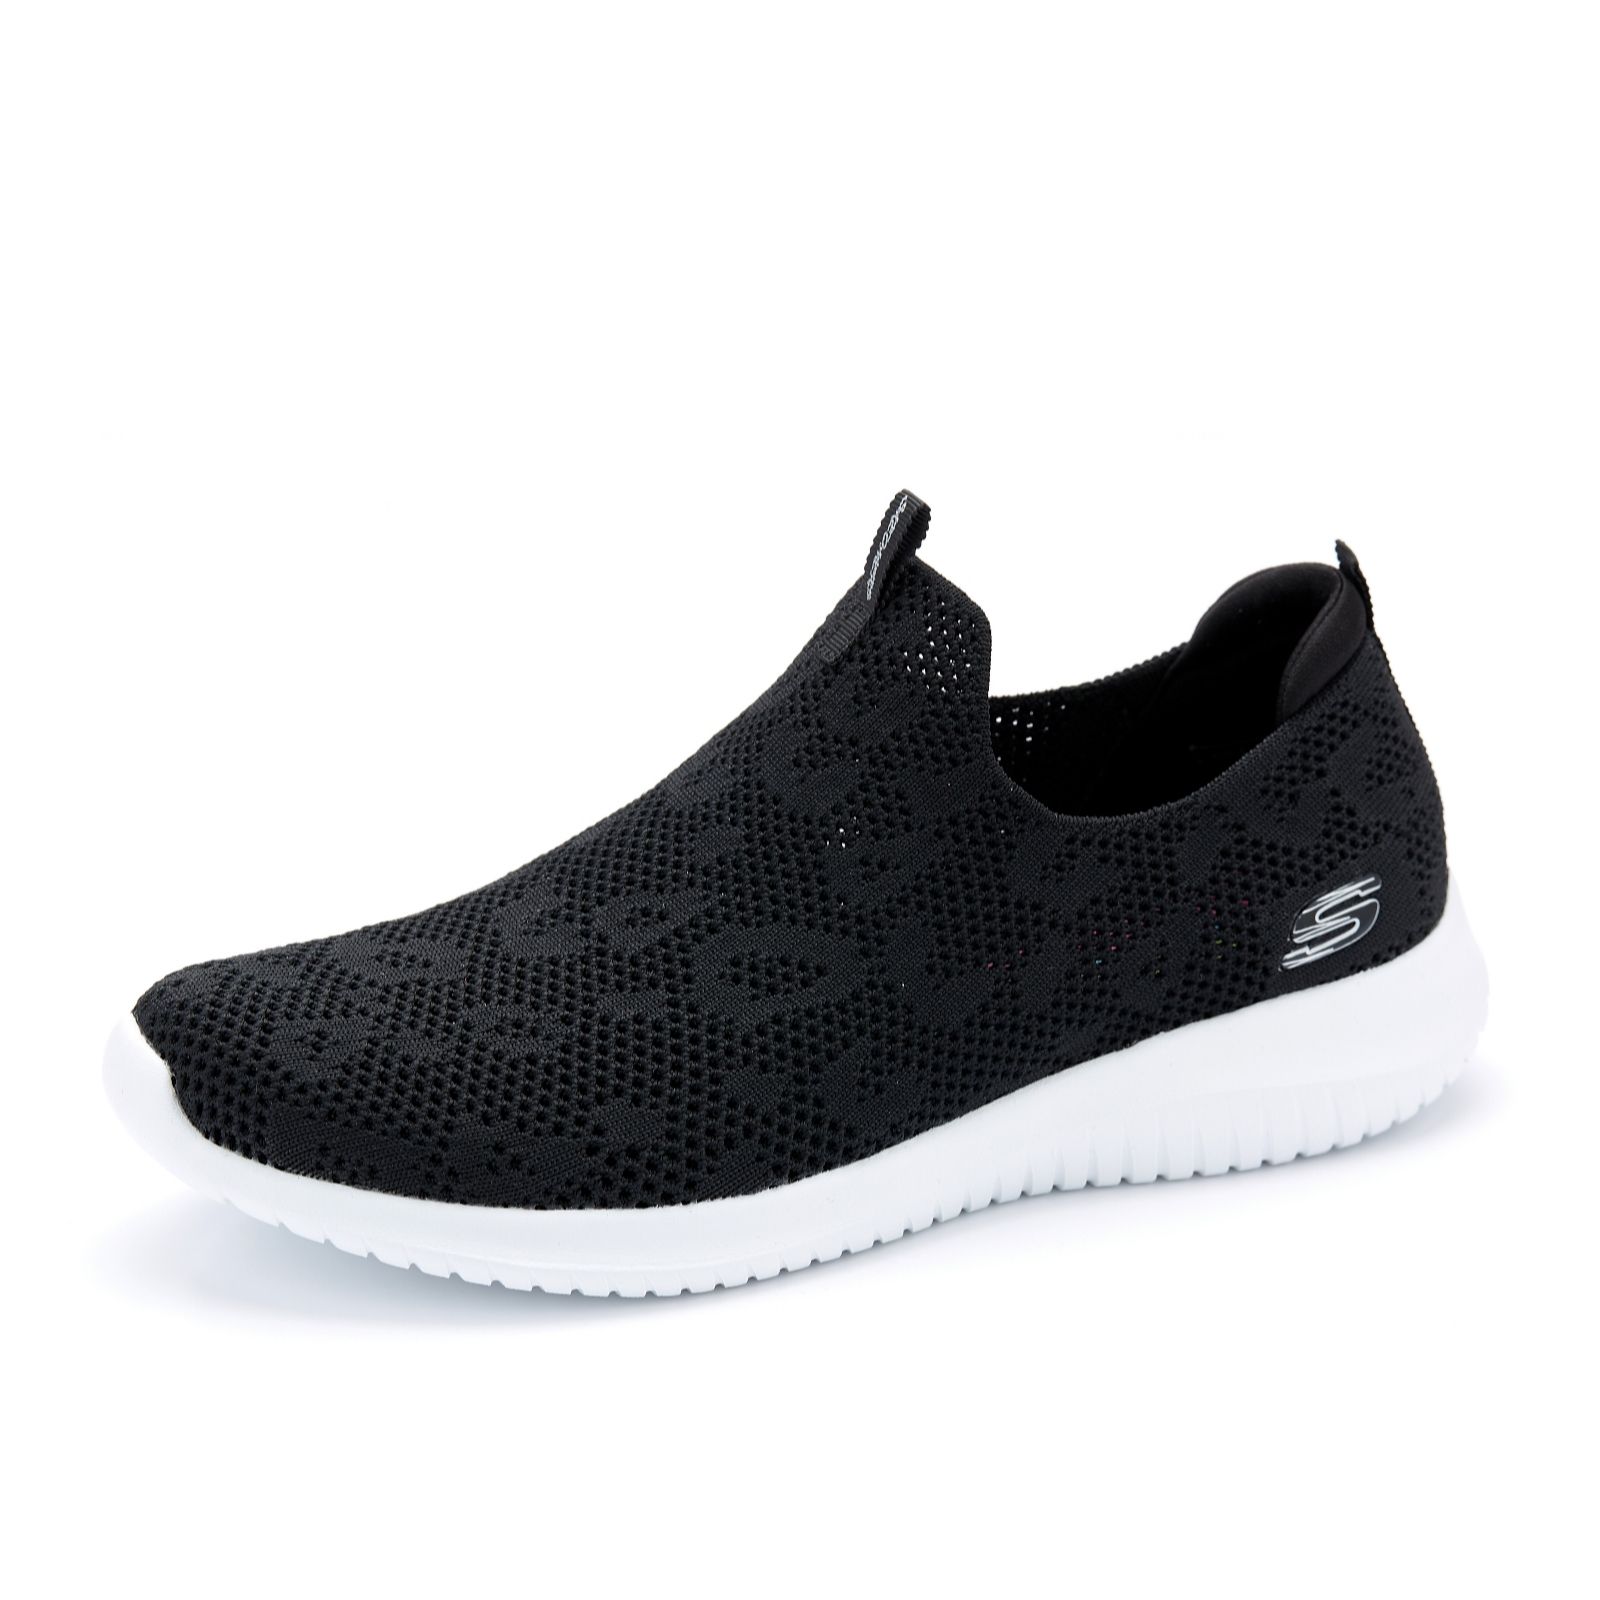 stretch knit from sketchers